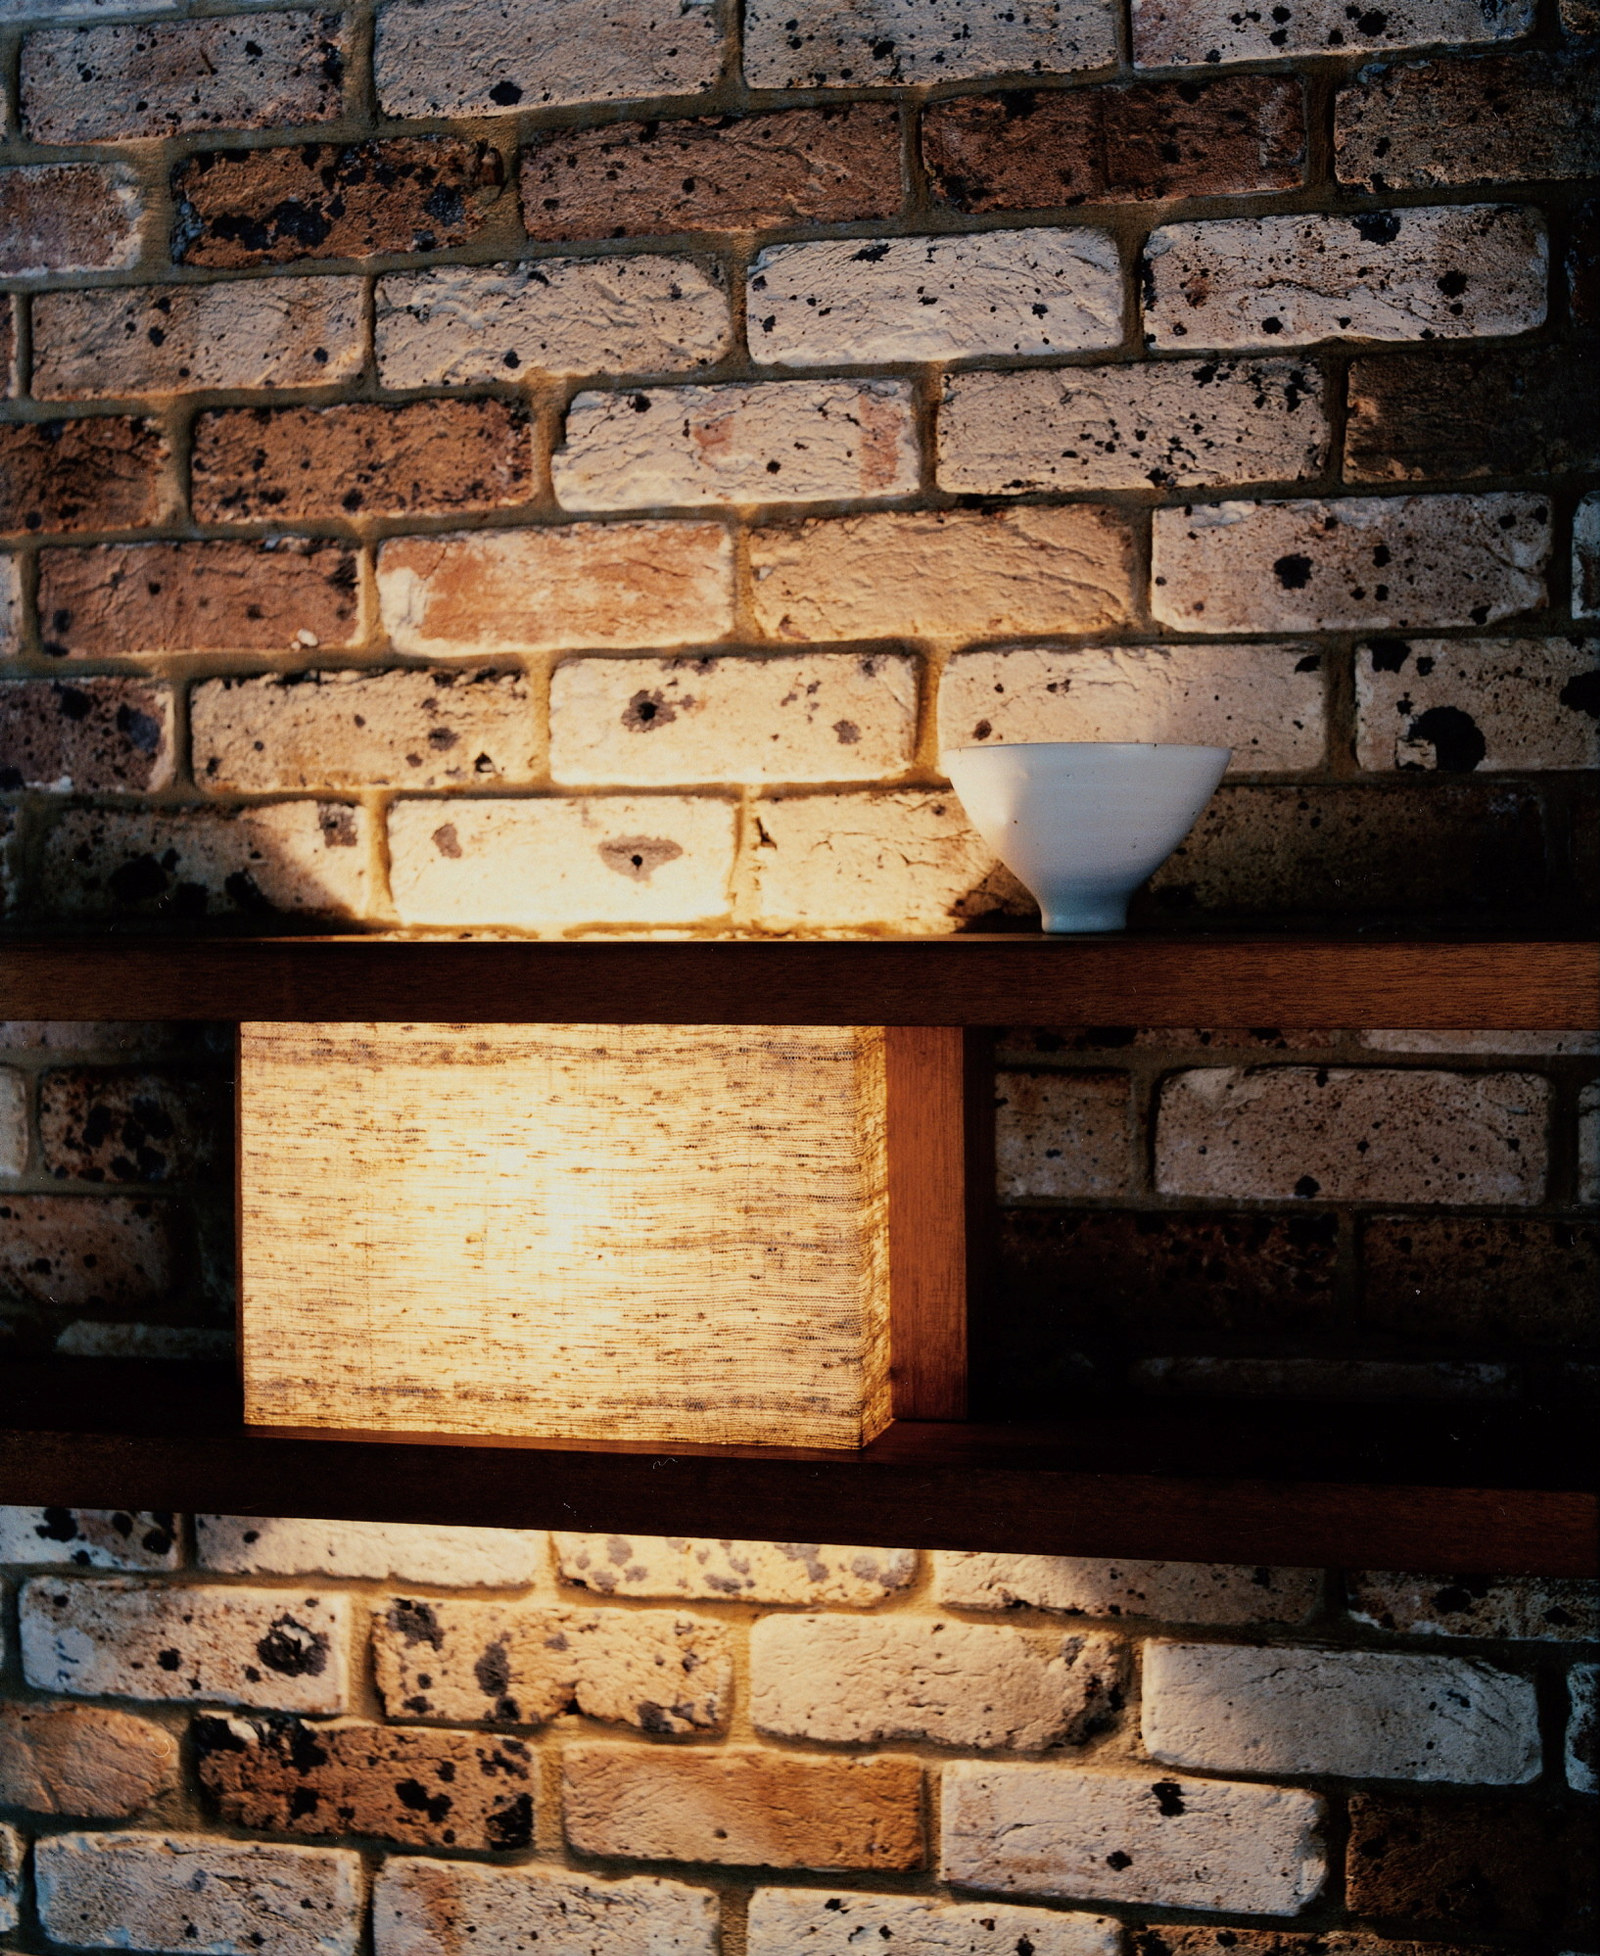 This is a detail photograph of a brick wall with two timber shelves. In one section between the two shelves a light has been created using a piece of linen.